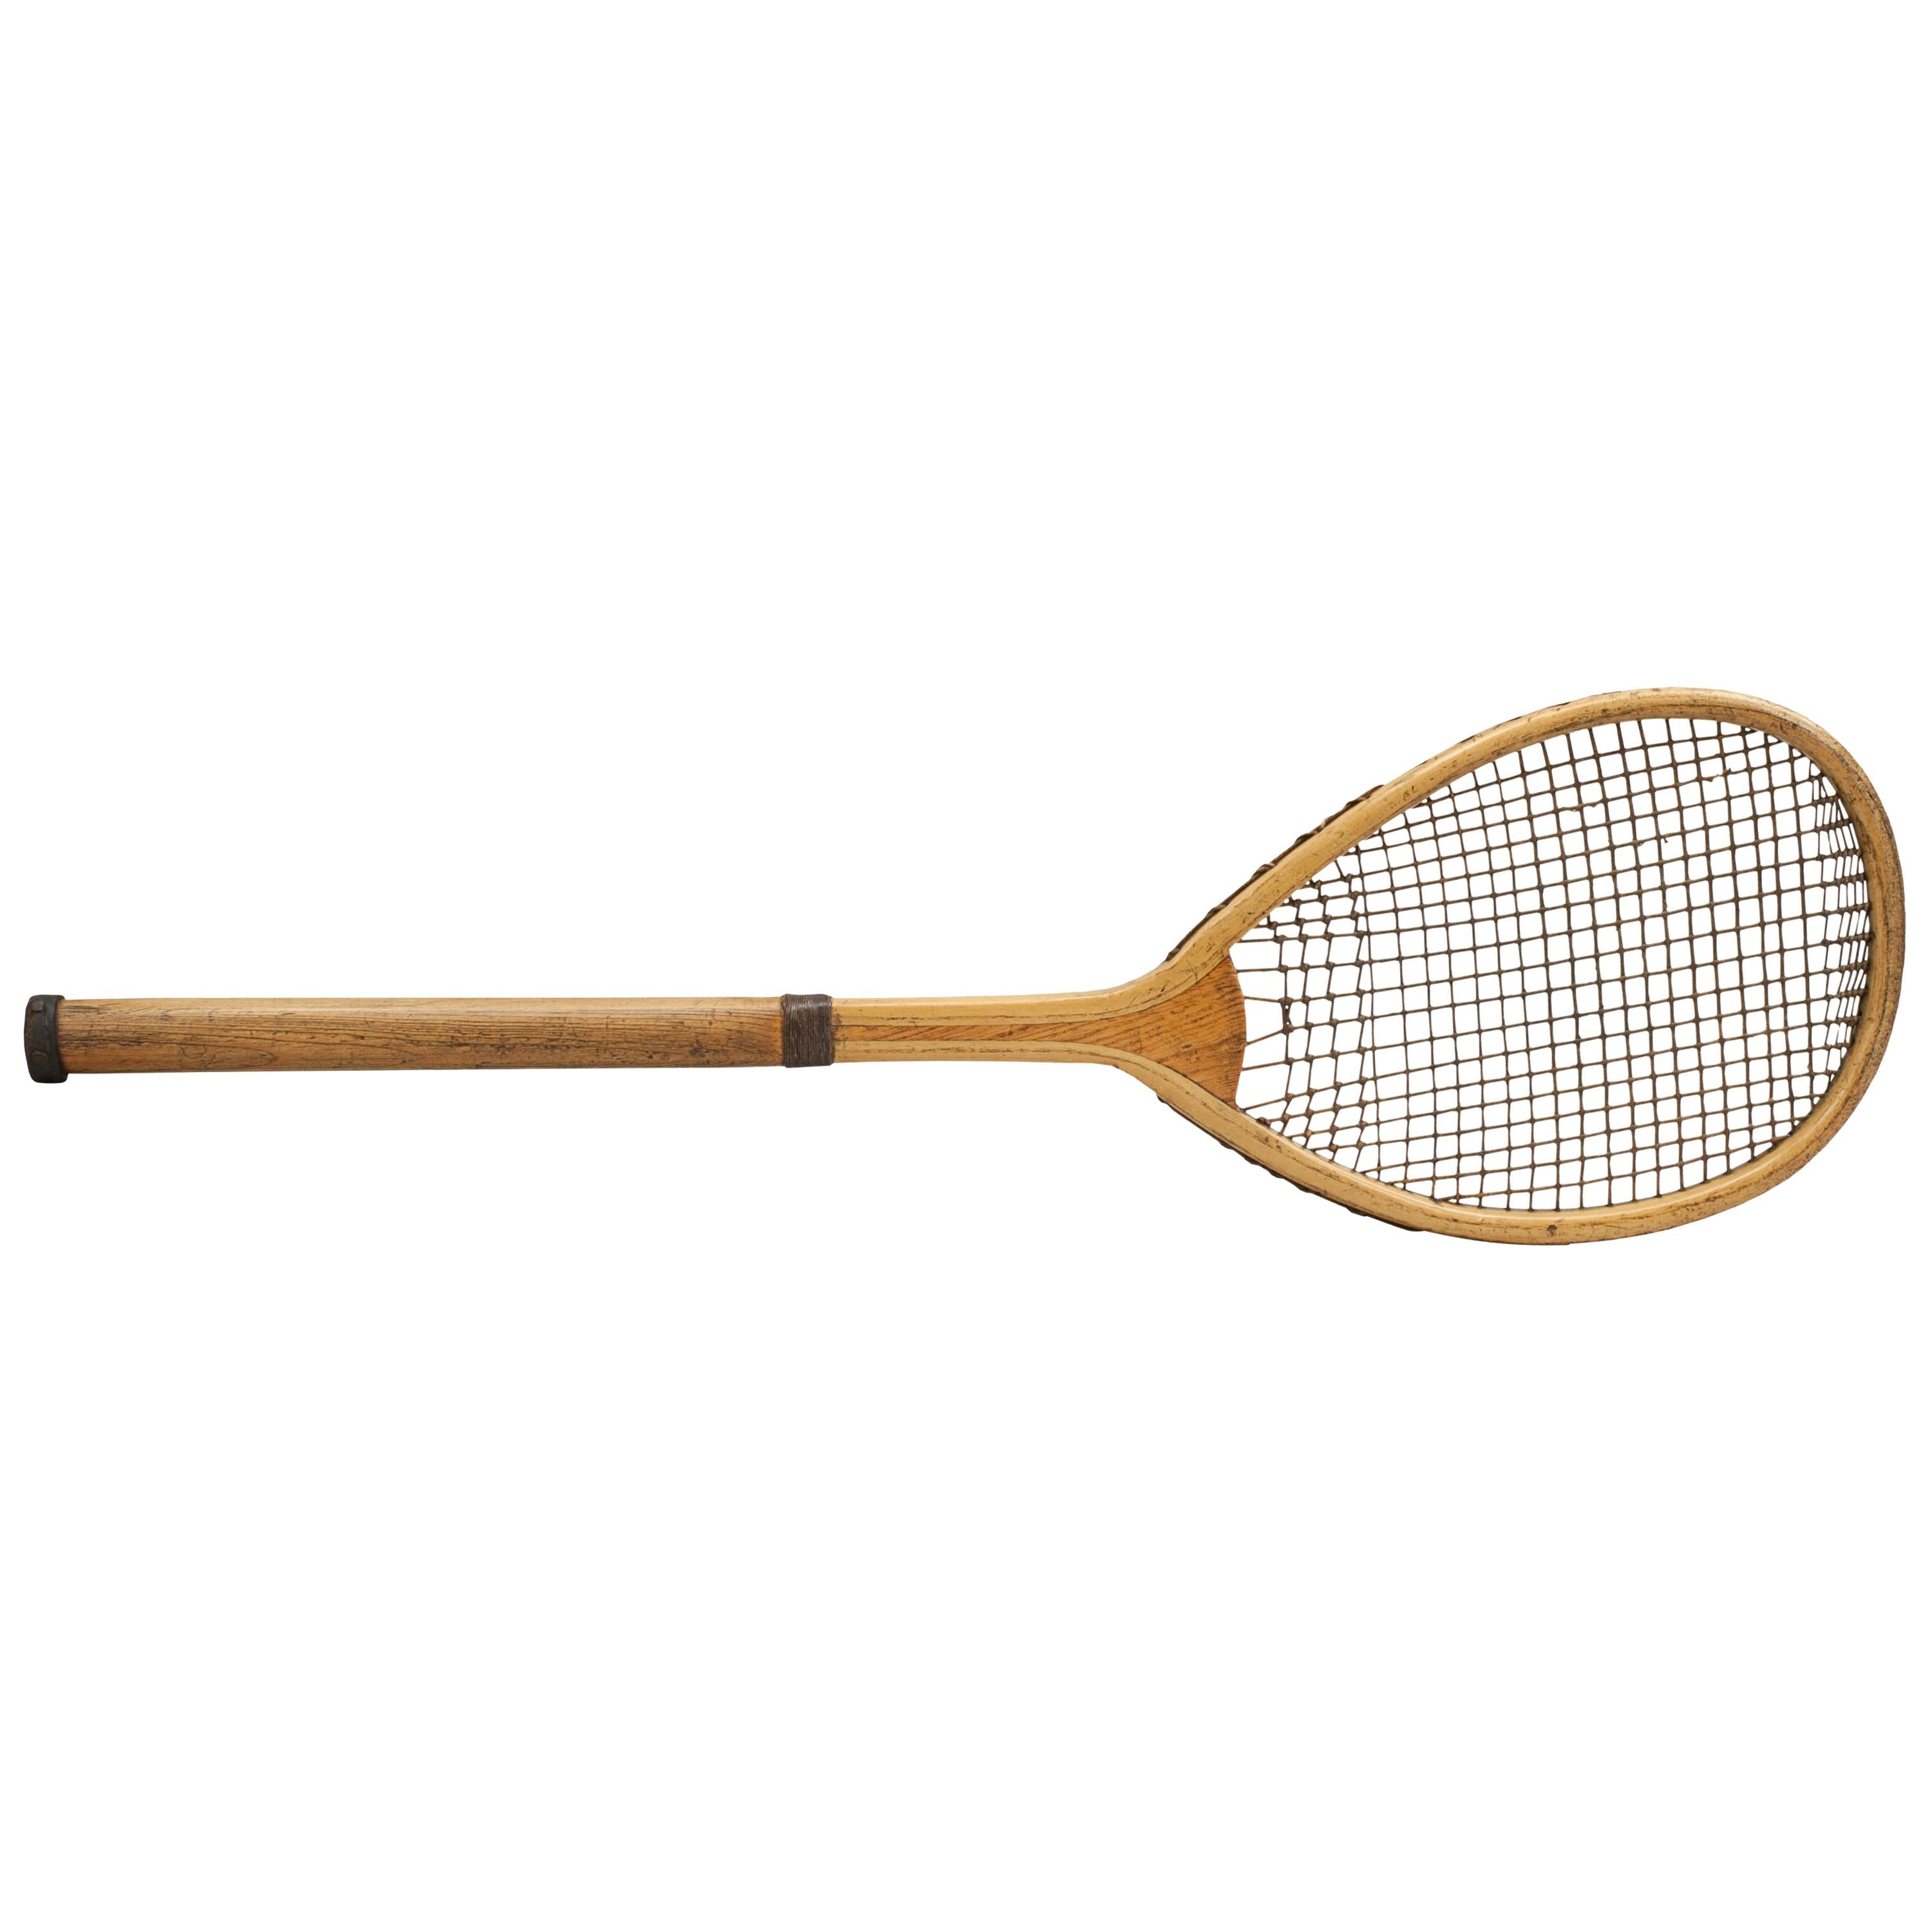 Antique Lopsided Henry Malings Tennis Racket, 19th Century